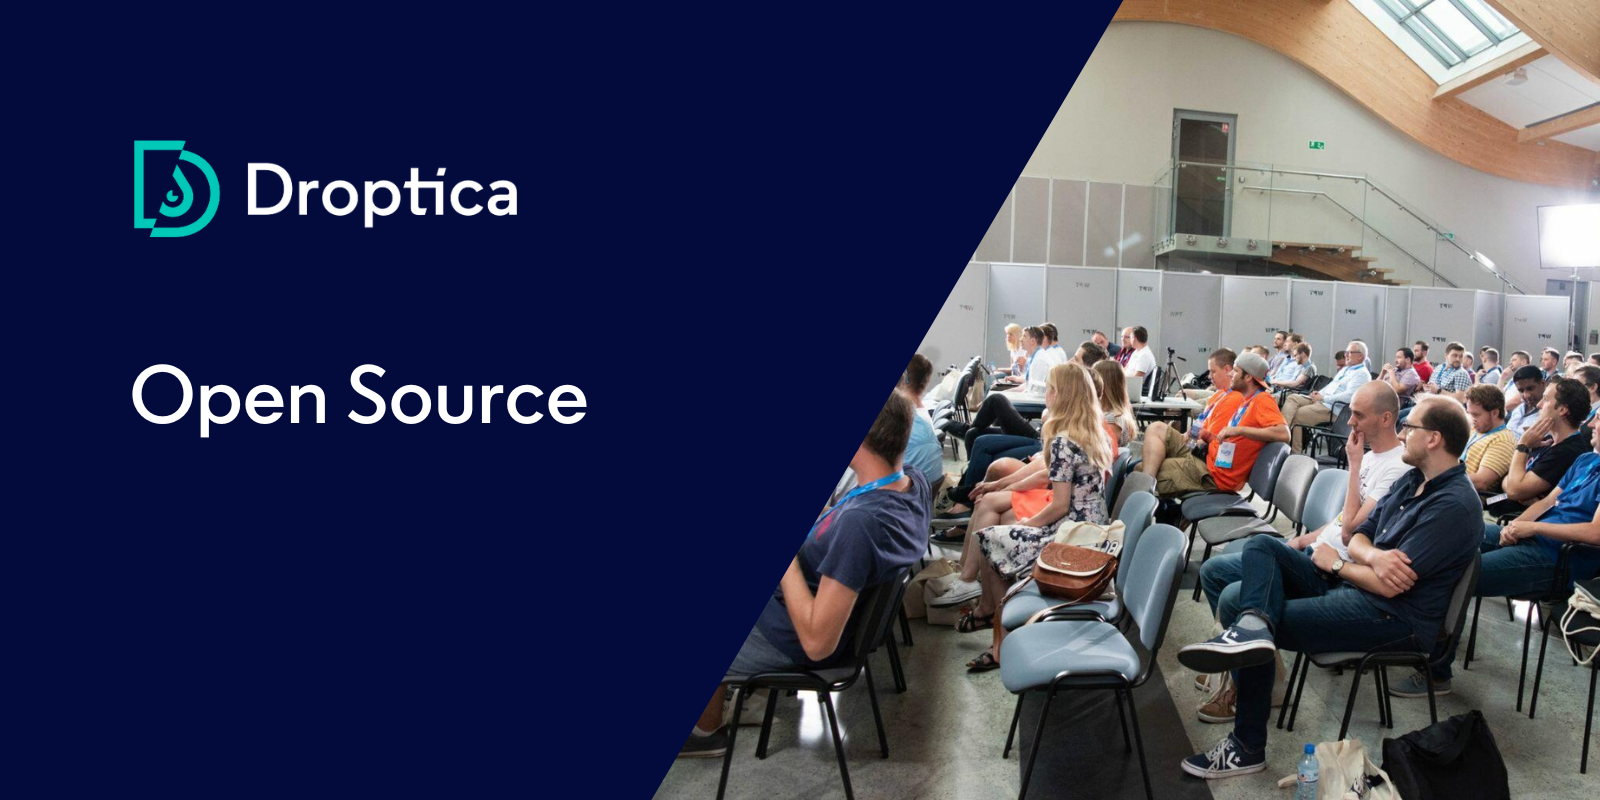 Learn about Droptica's commitment to open-source solutions and community contributions.